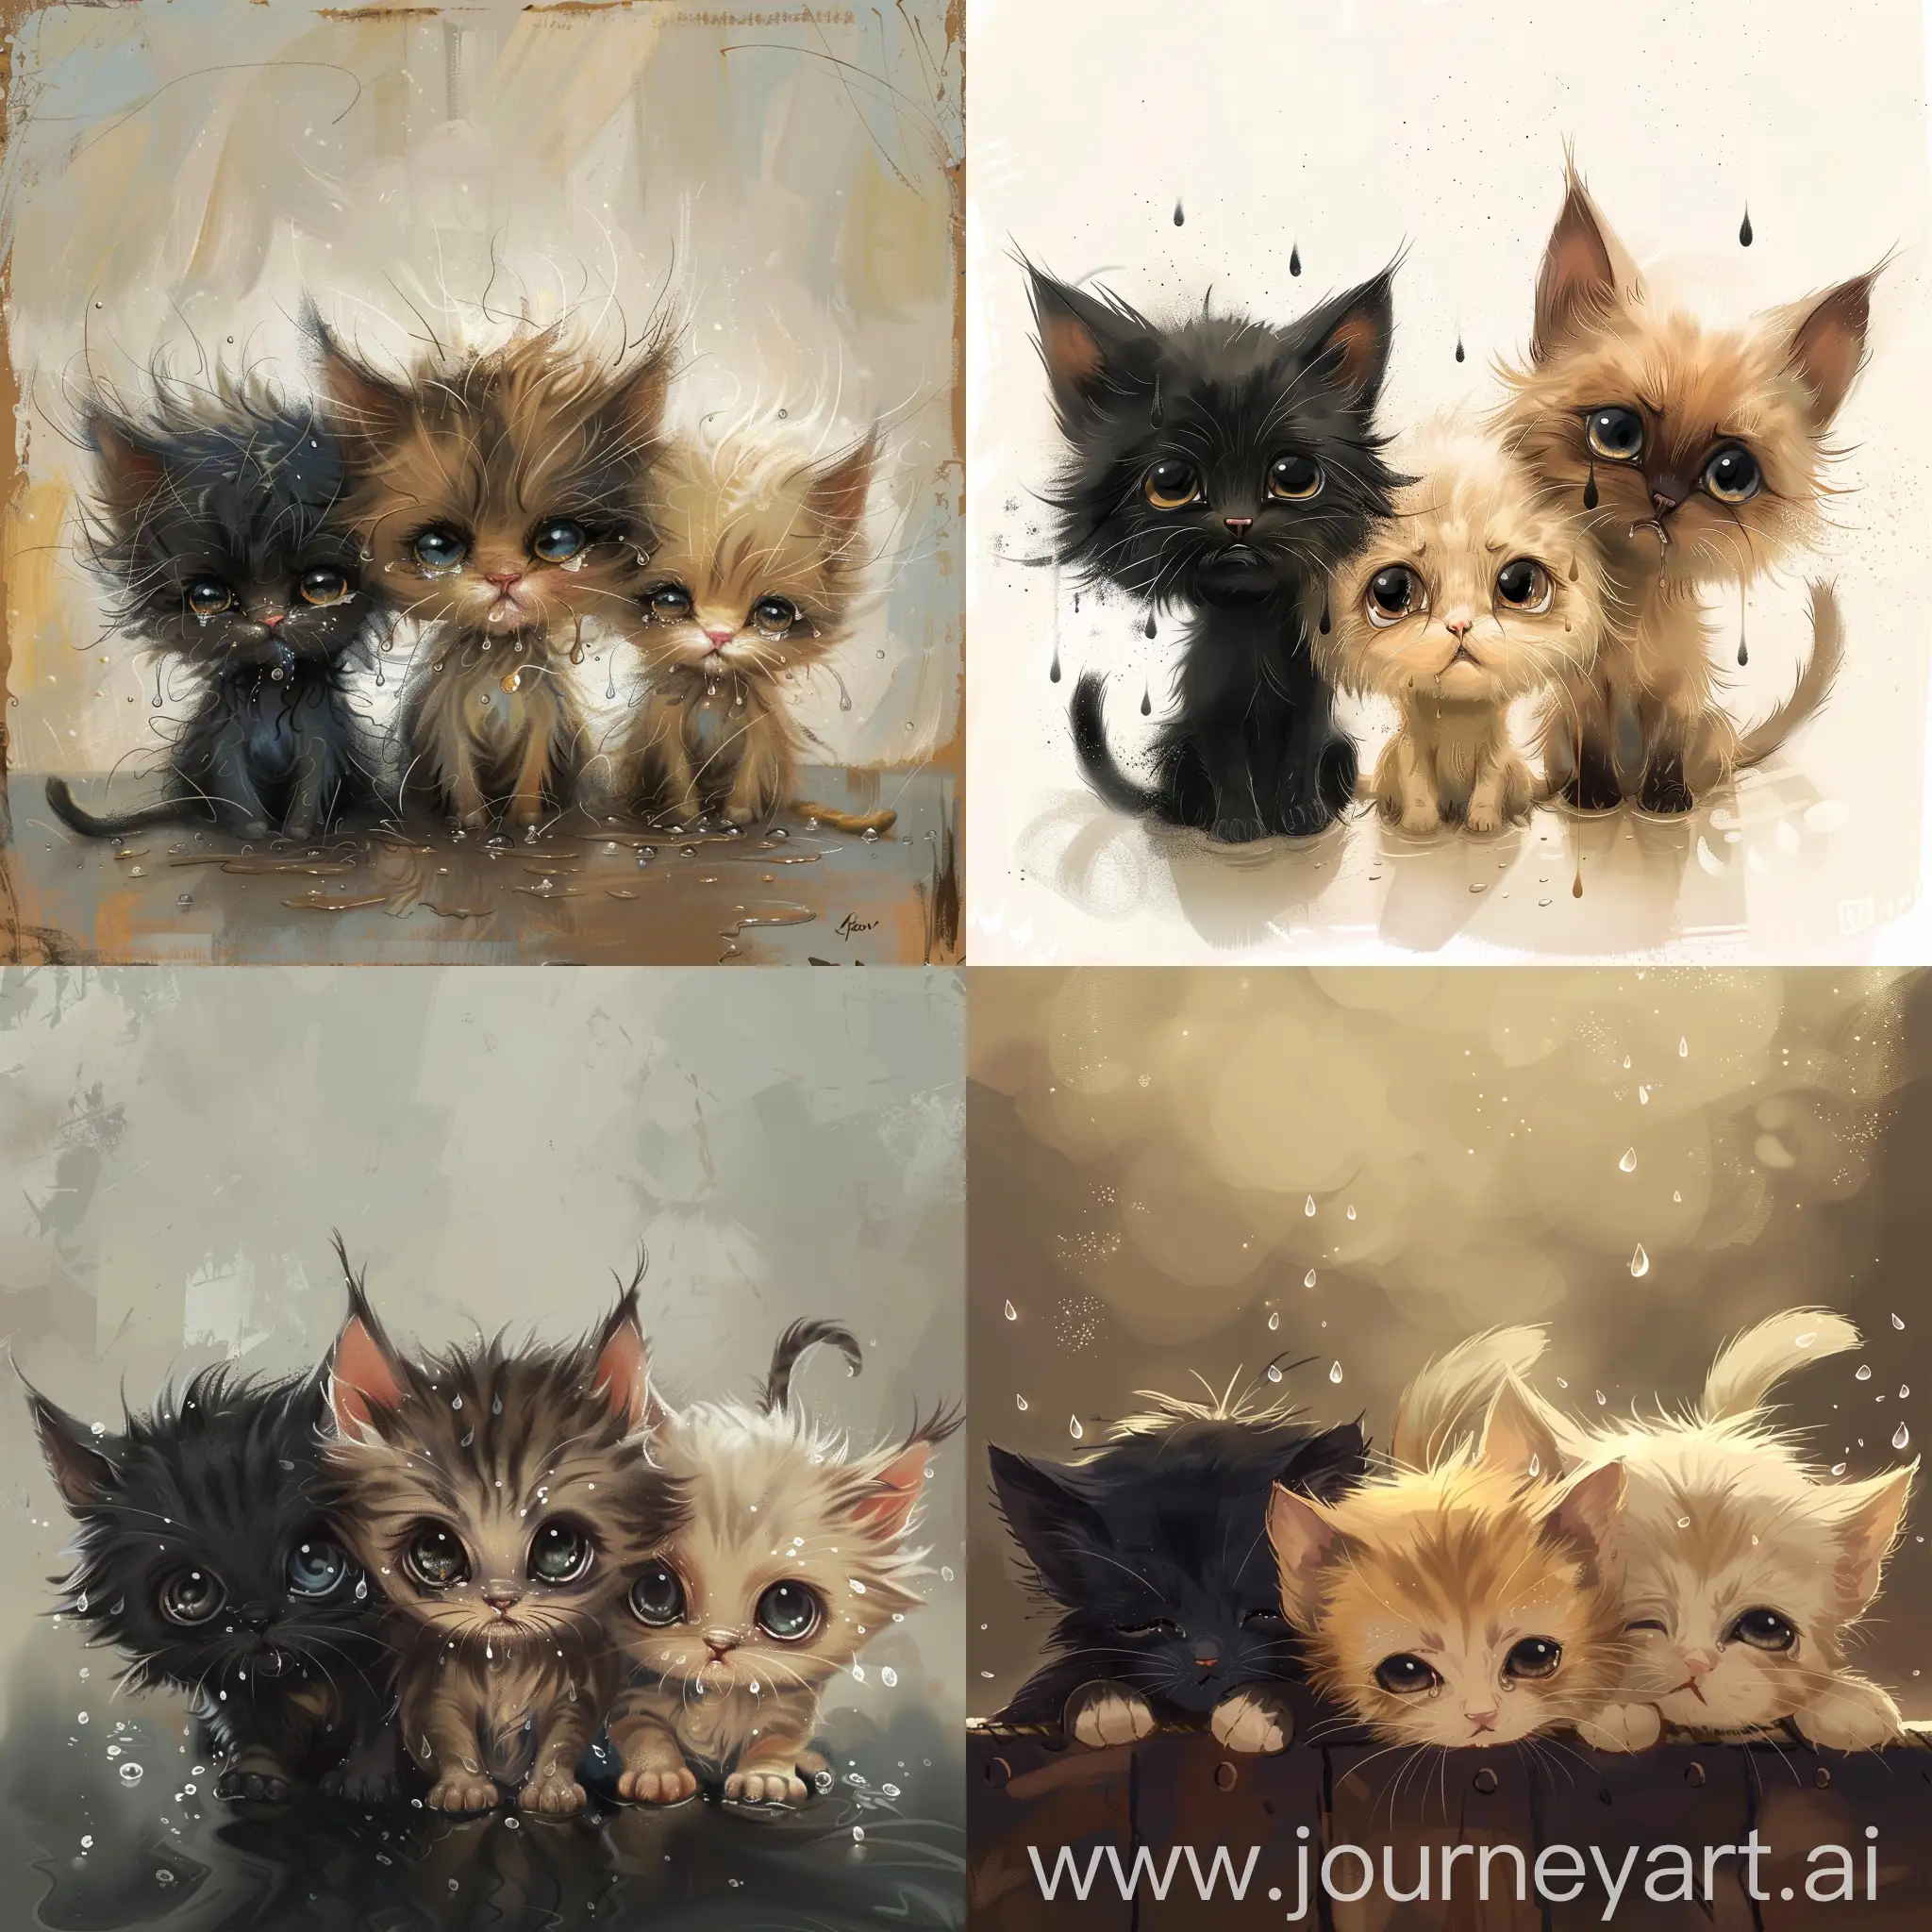 three kittens, the first has black hair, the second has brown hair, the third has blond hair. They are lost and crying tears